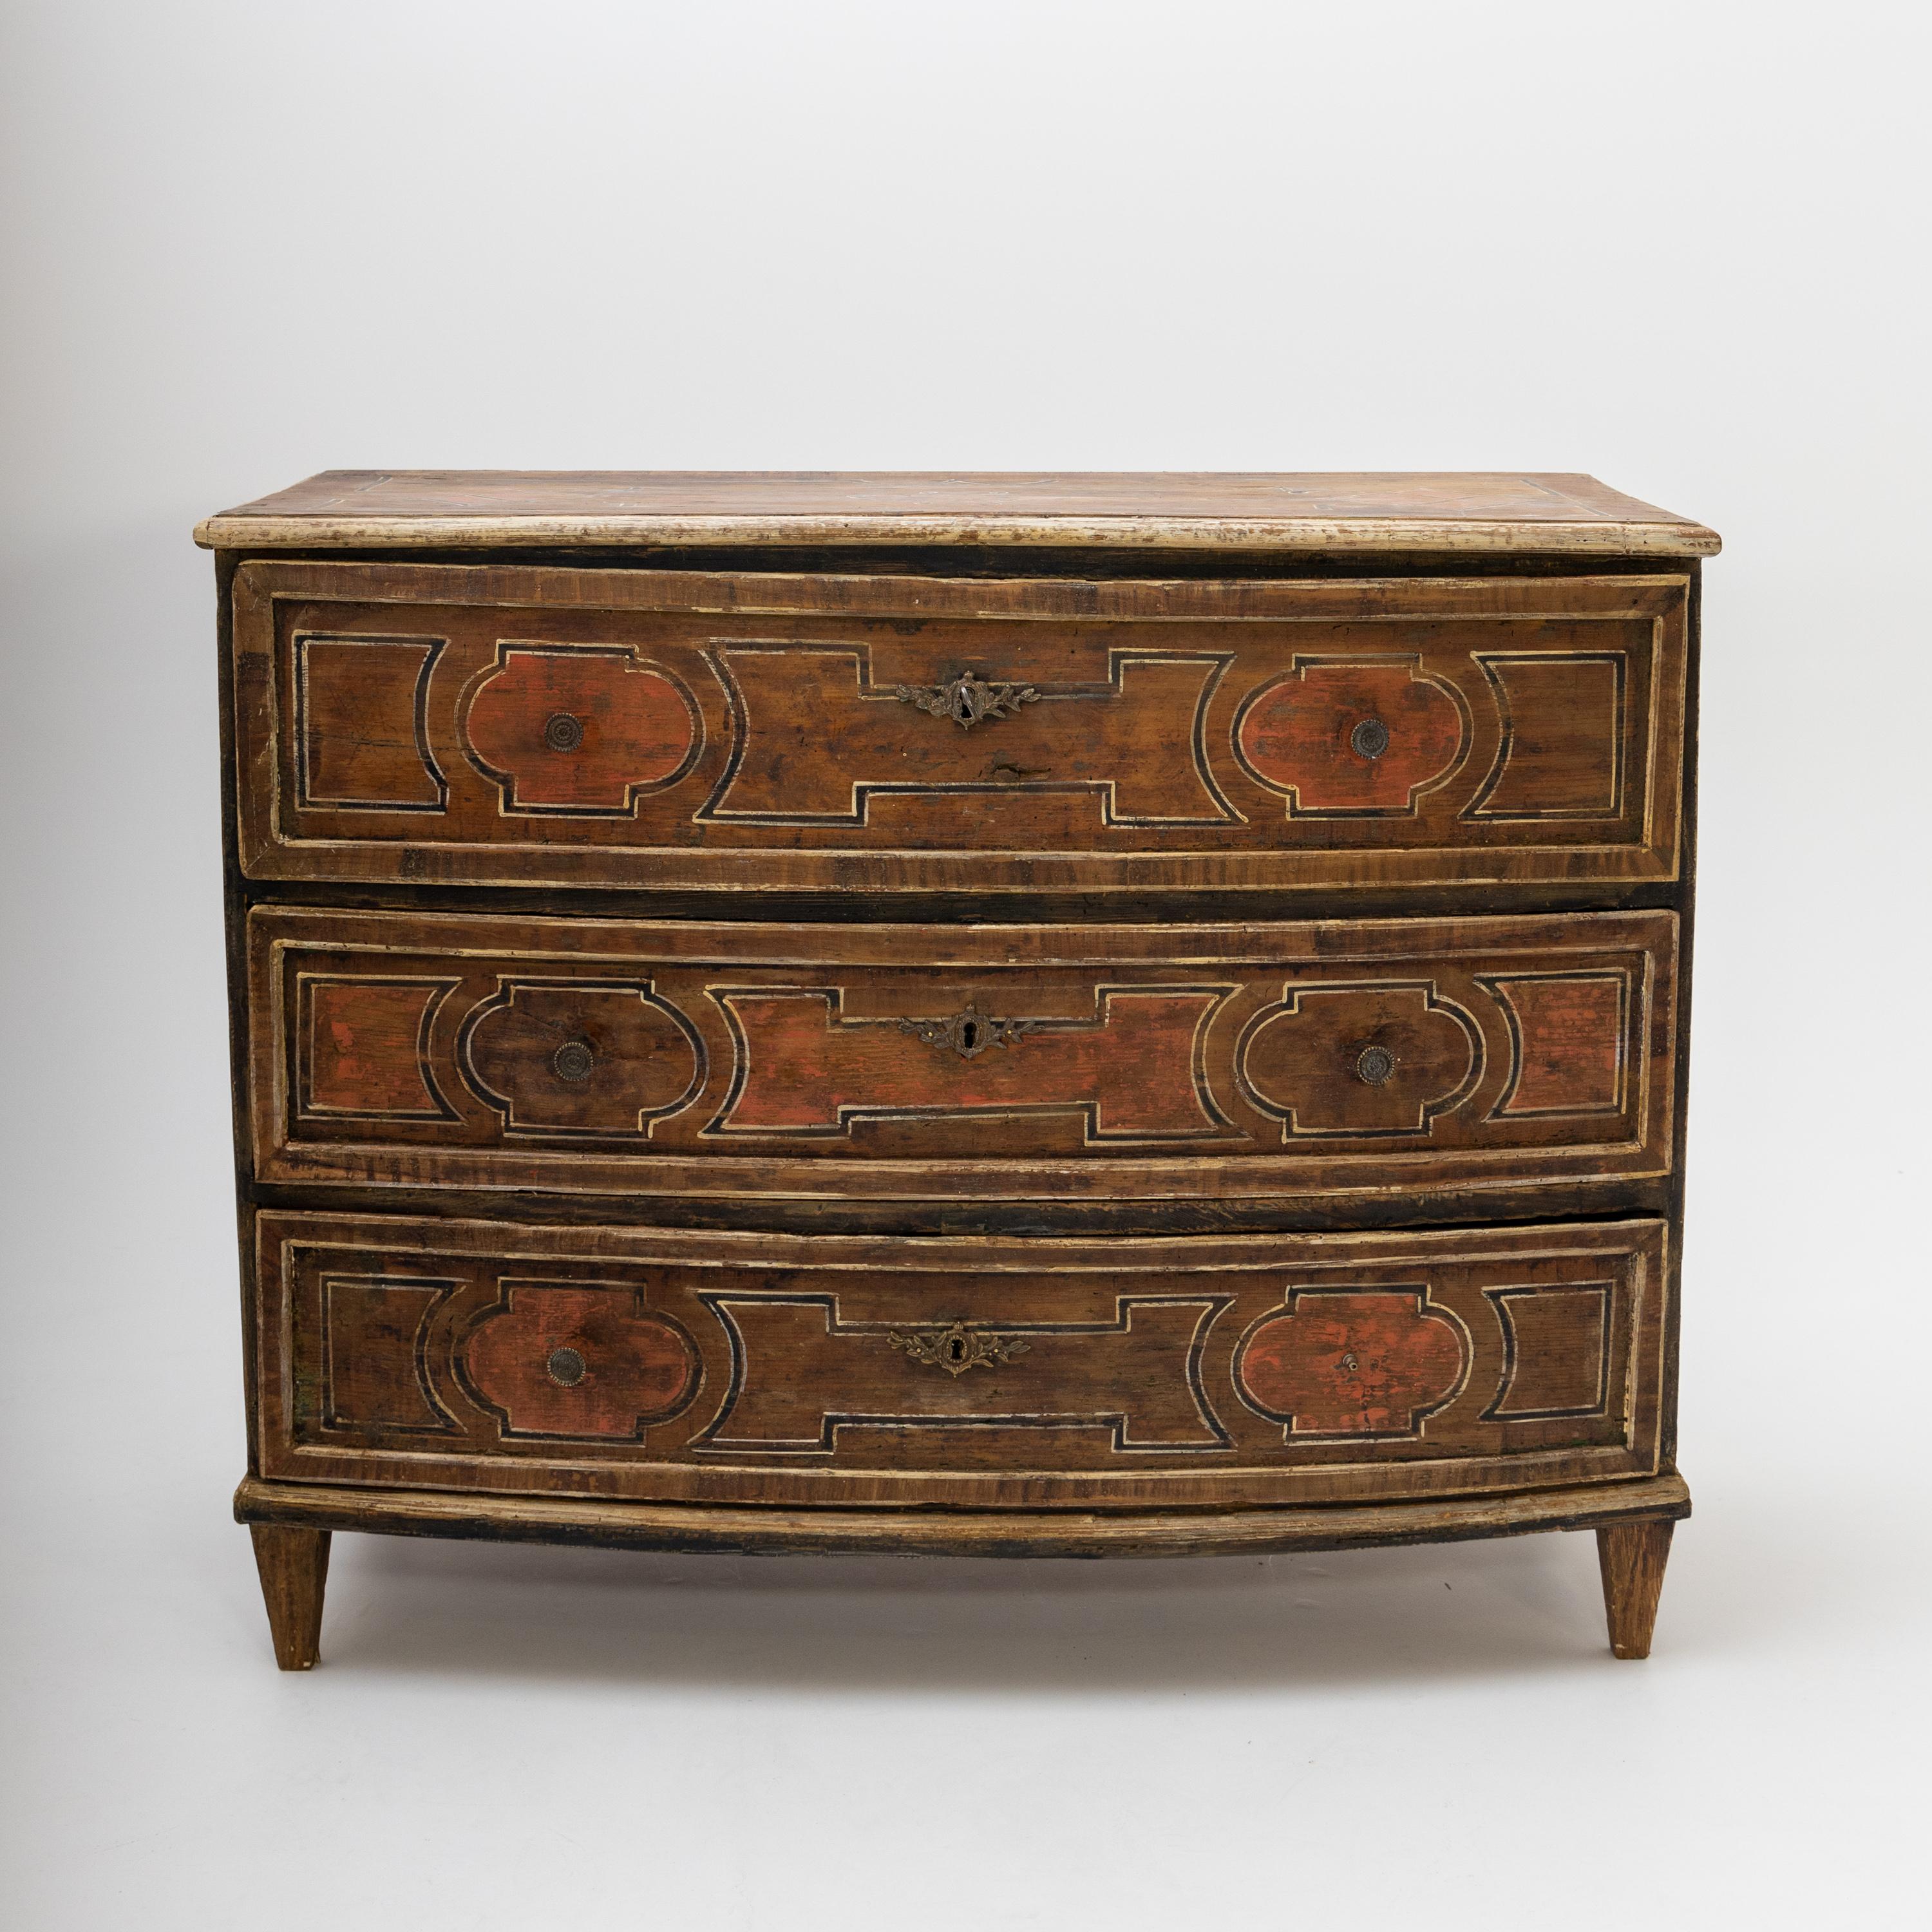 A three-bay baroque chest of drawers with original geometrically decoration on the drawer fronts and sides of the body, as well as on the top plate.
 